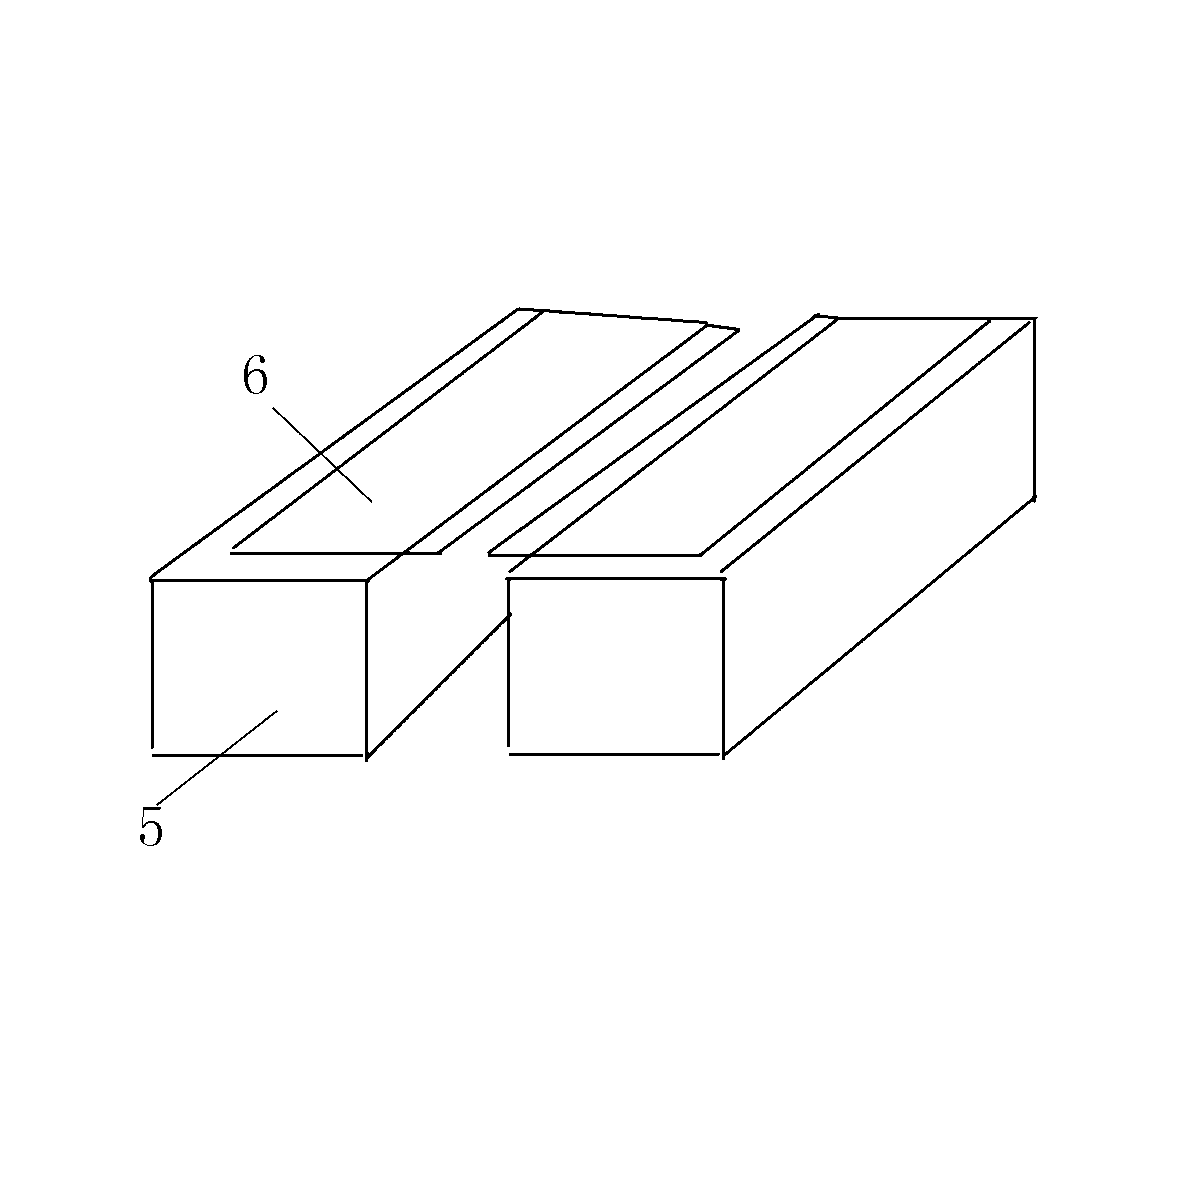 Large-sized slide supporter with core overturning table